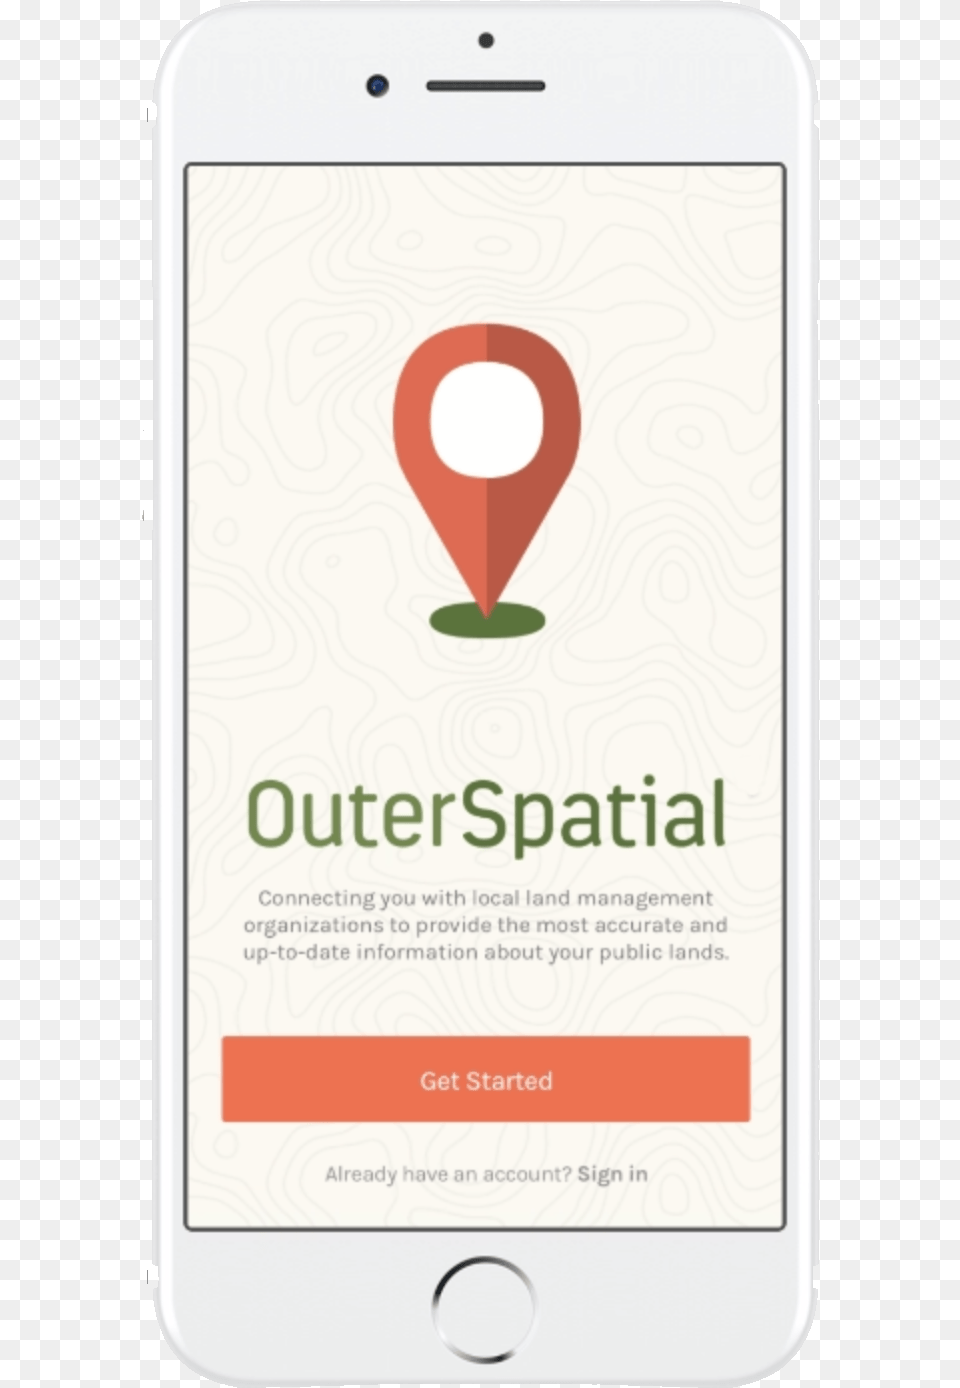 Outerspatial App Aerotel Smile Makassar, Electronics, Mobile Phone, Phone, Advertisement Png